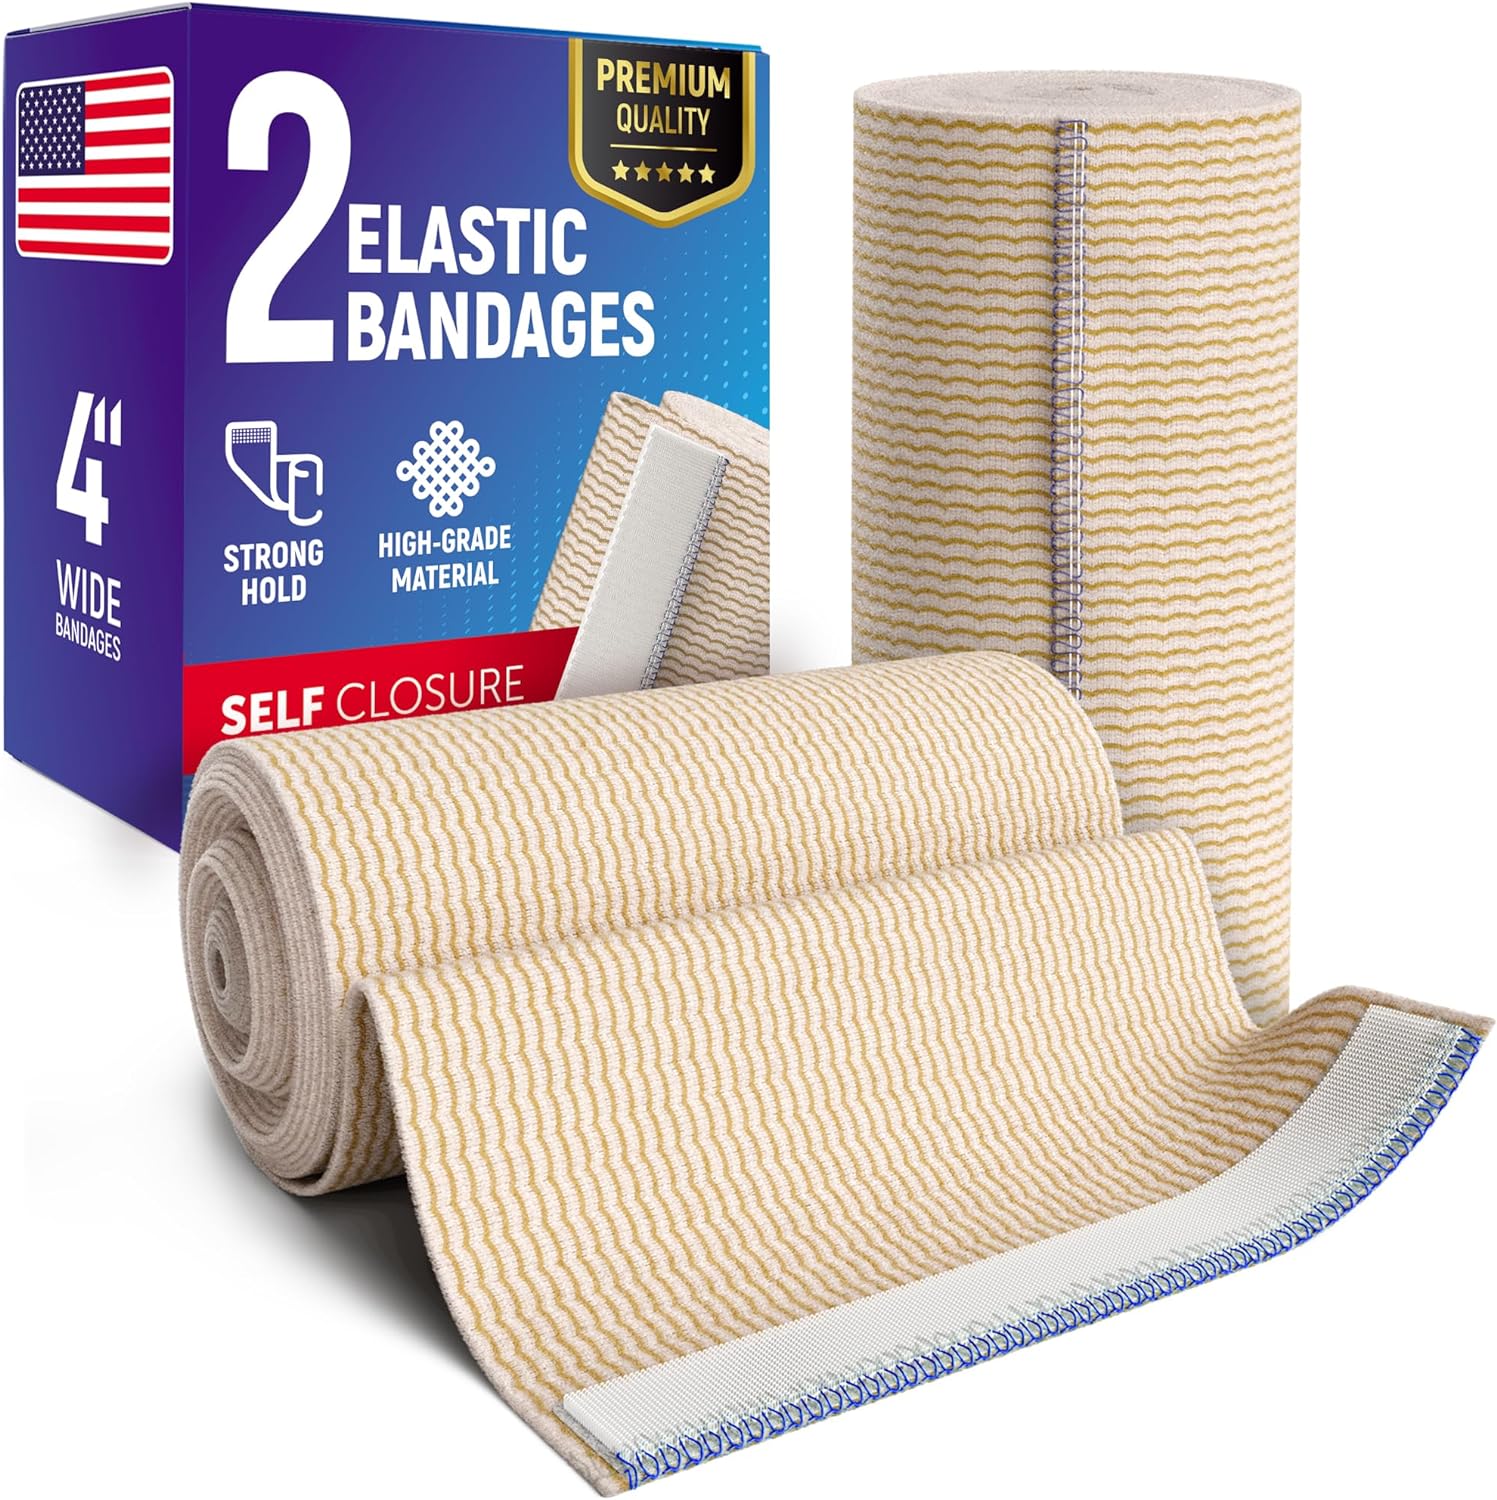 Elastic fabric bandage roll 6 cm x 5 m (2.4 in x 16 ft) to cut as needed